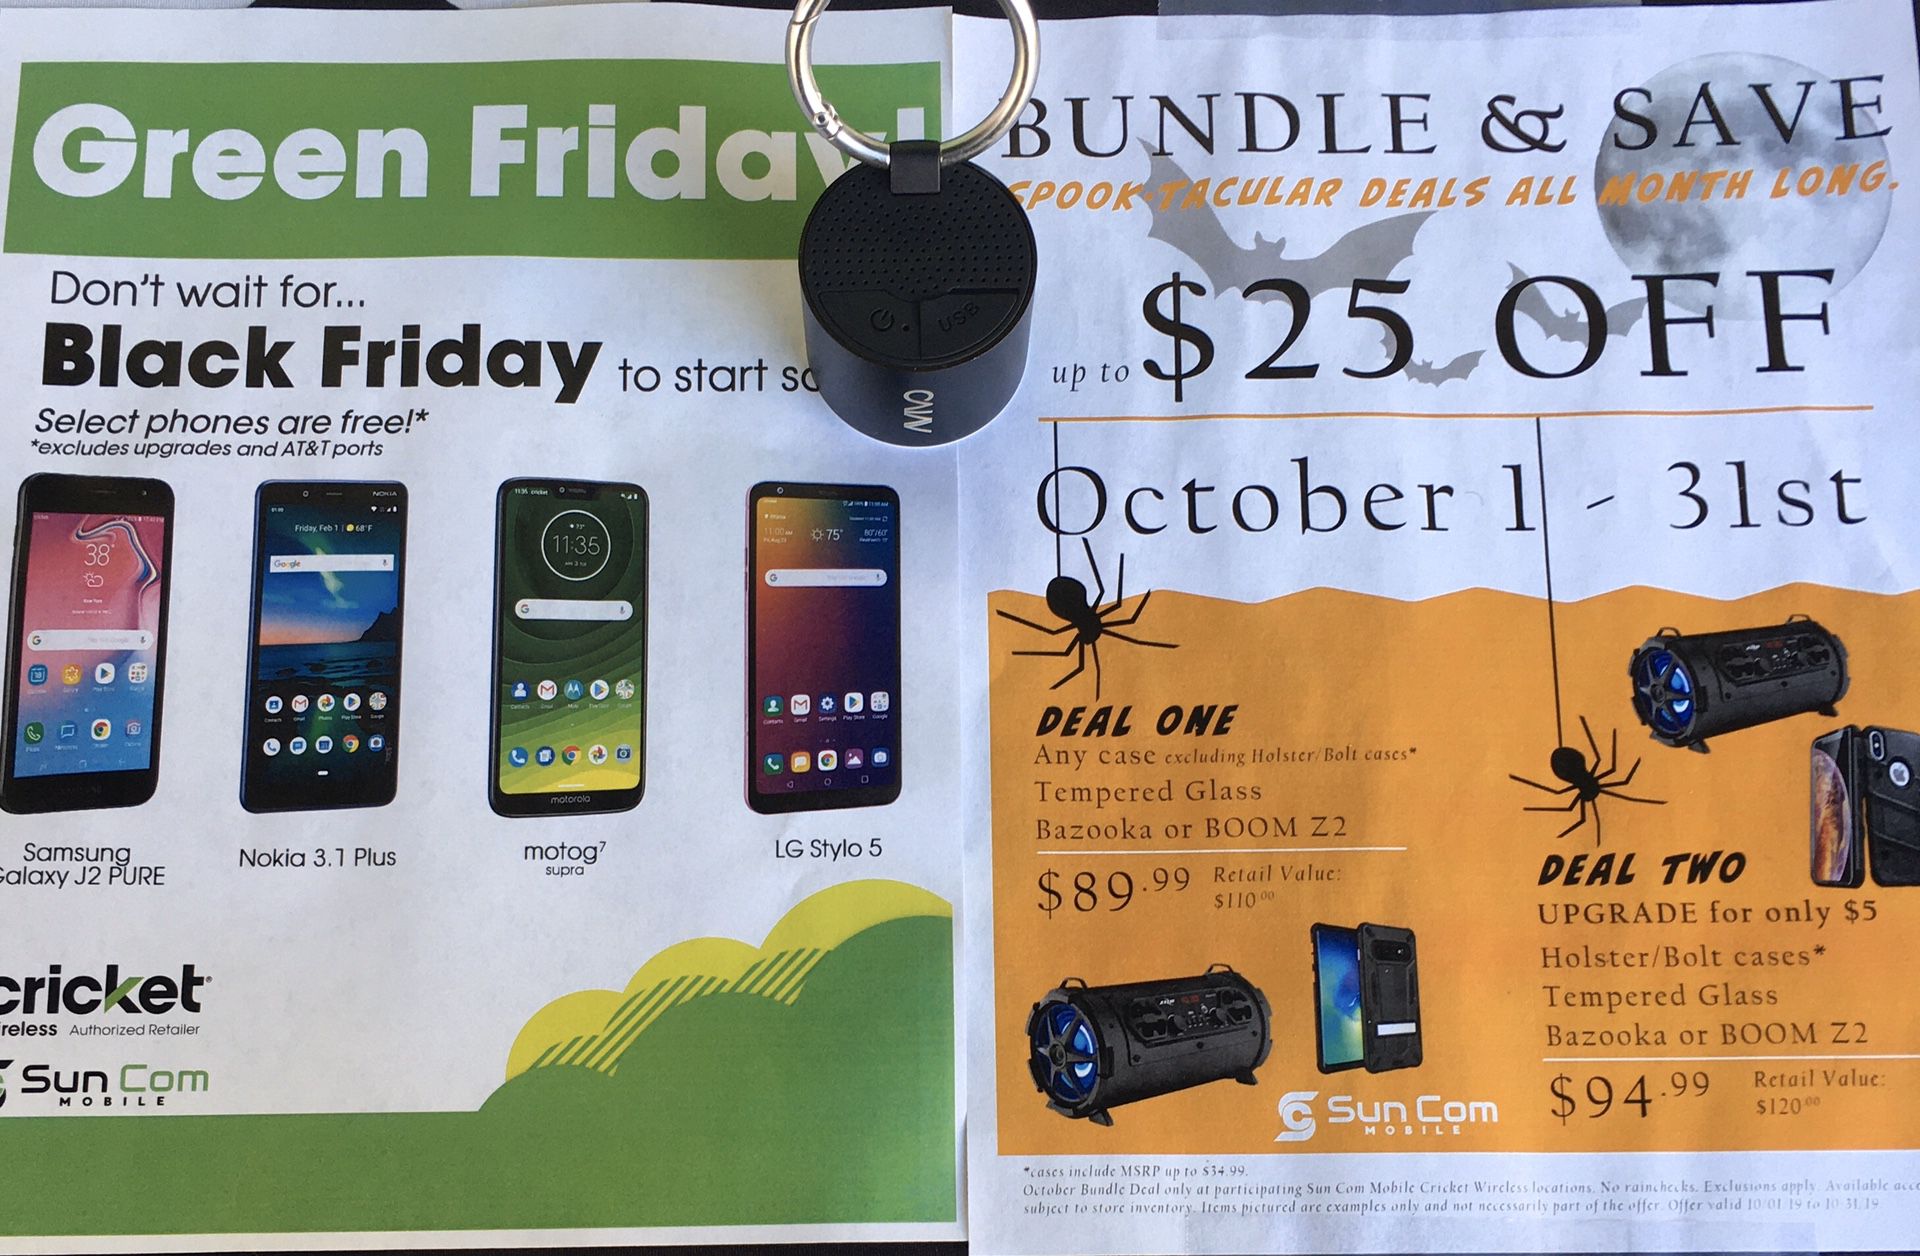 Last chance to get your AMAZING FREE phone!!! Cricket wireless in Sebastian